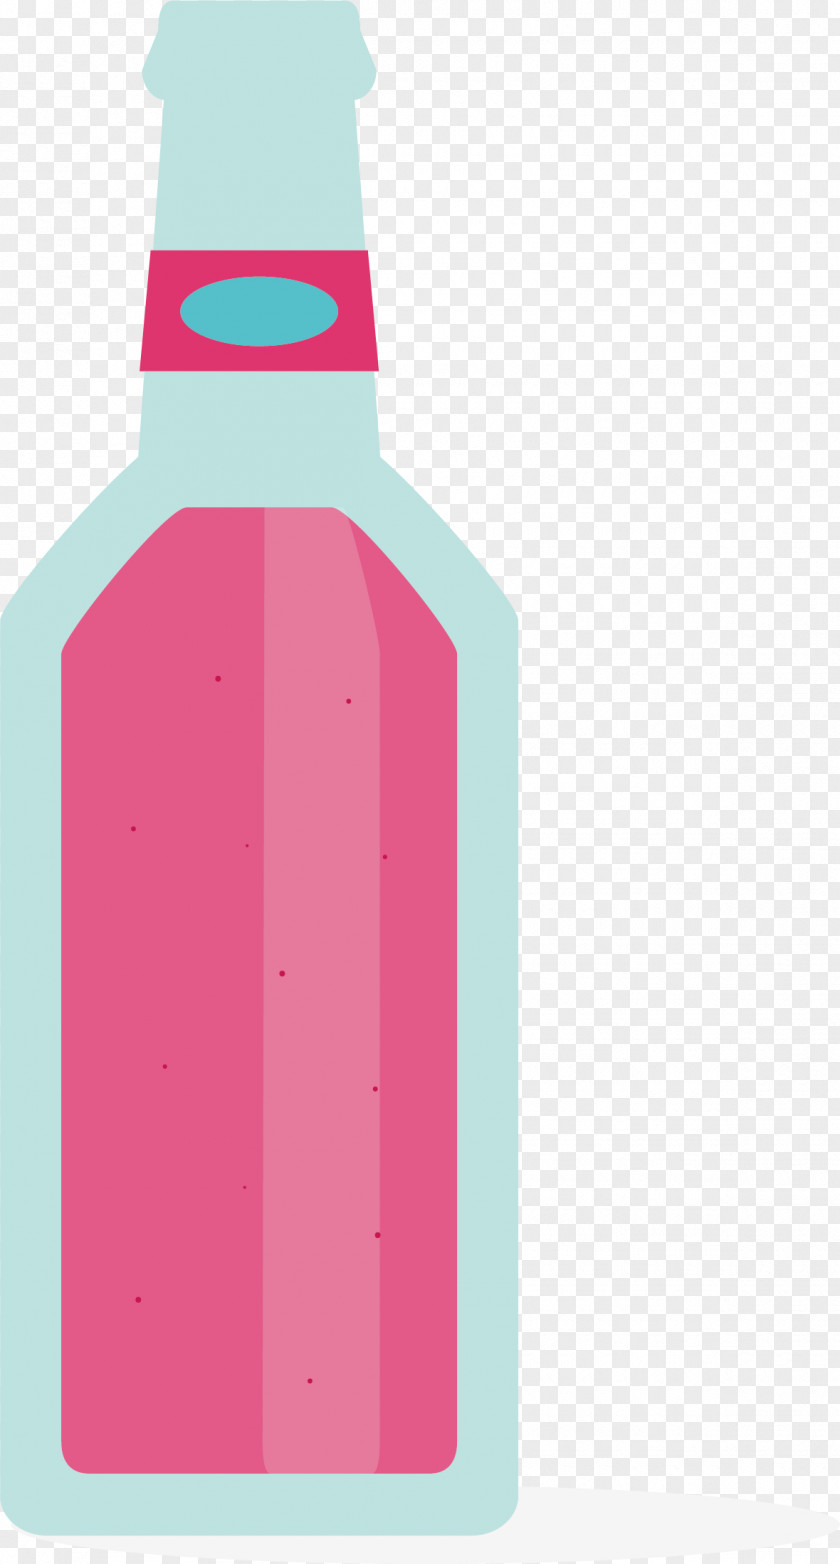 Cartoon Cocktail Drink Vector Wine Glass Bottle Pattern PNG